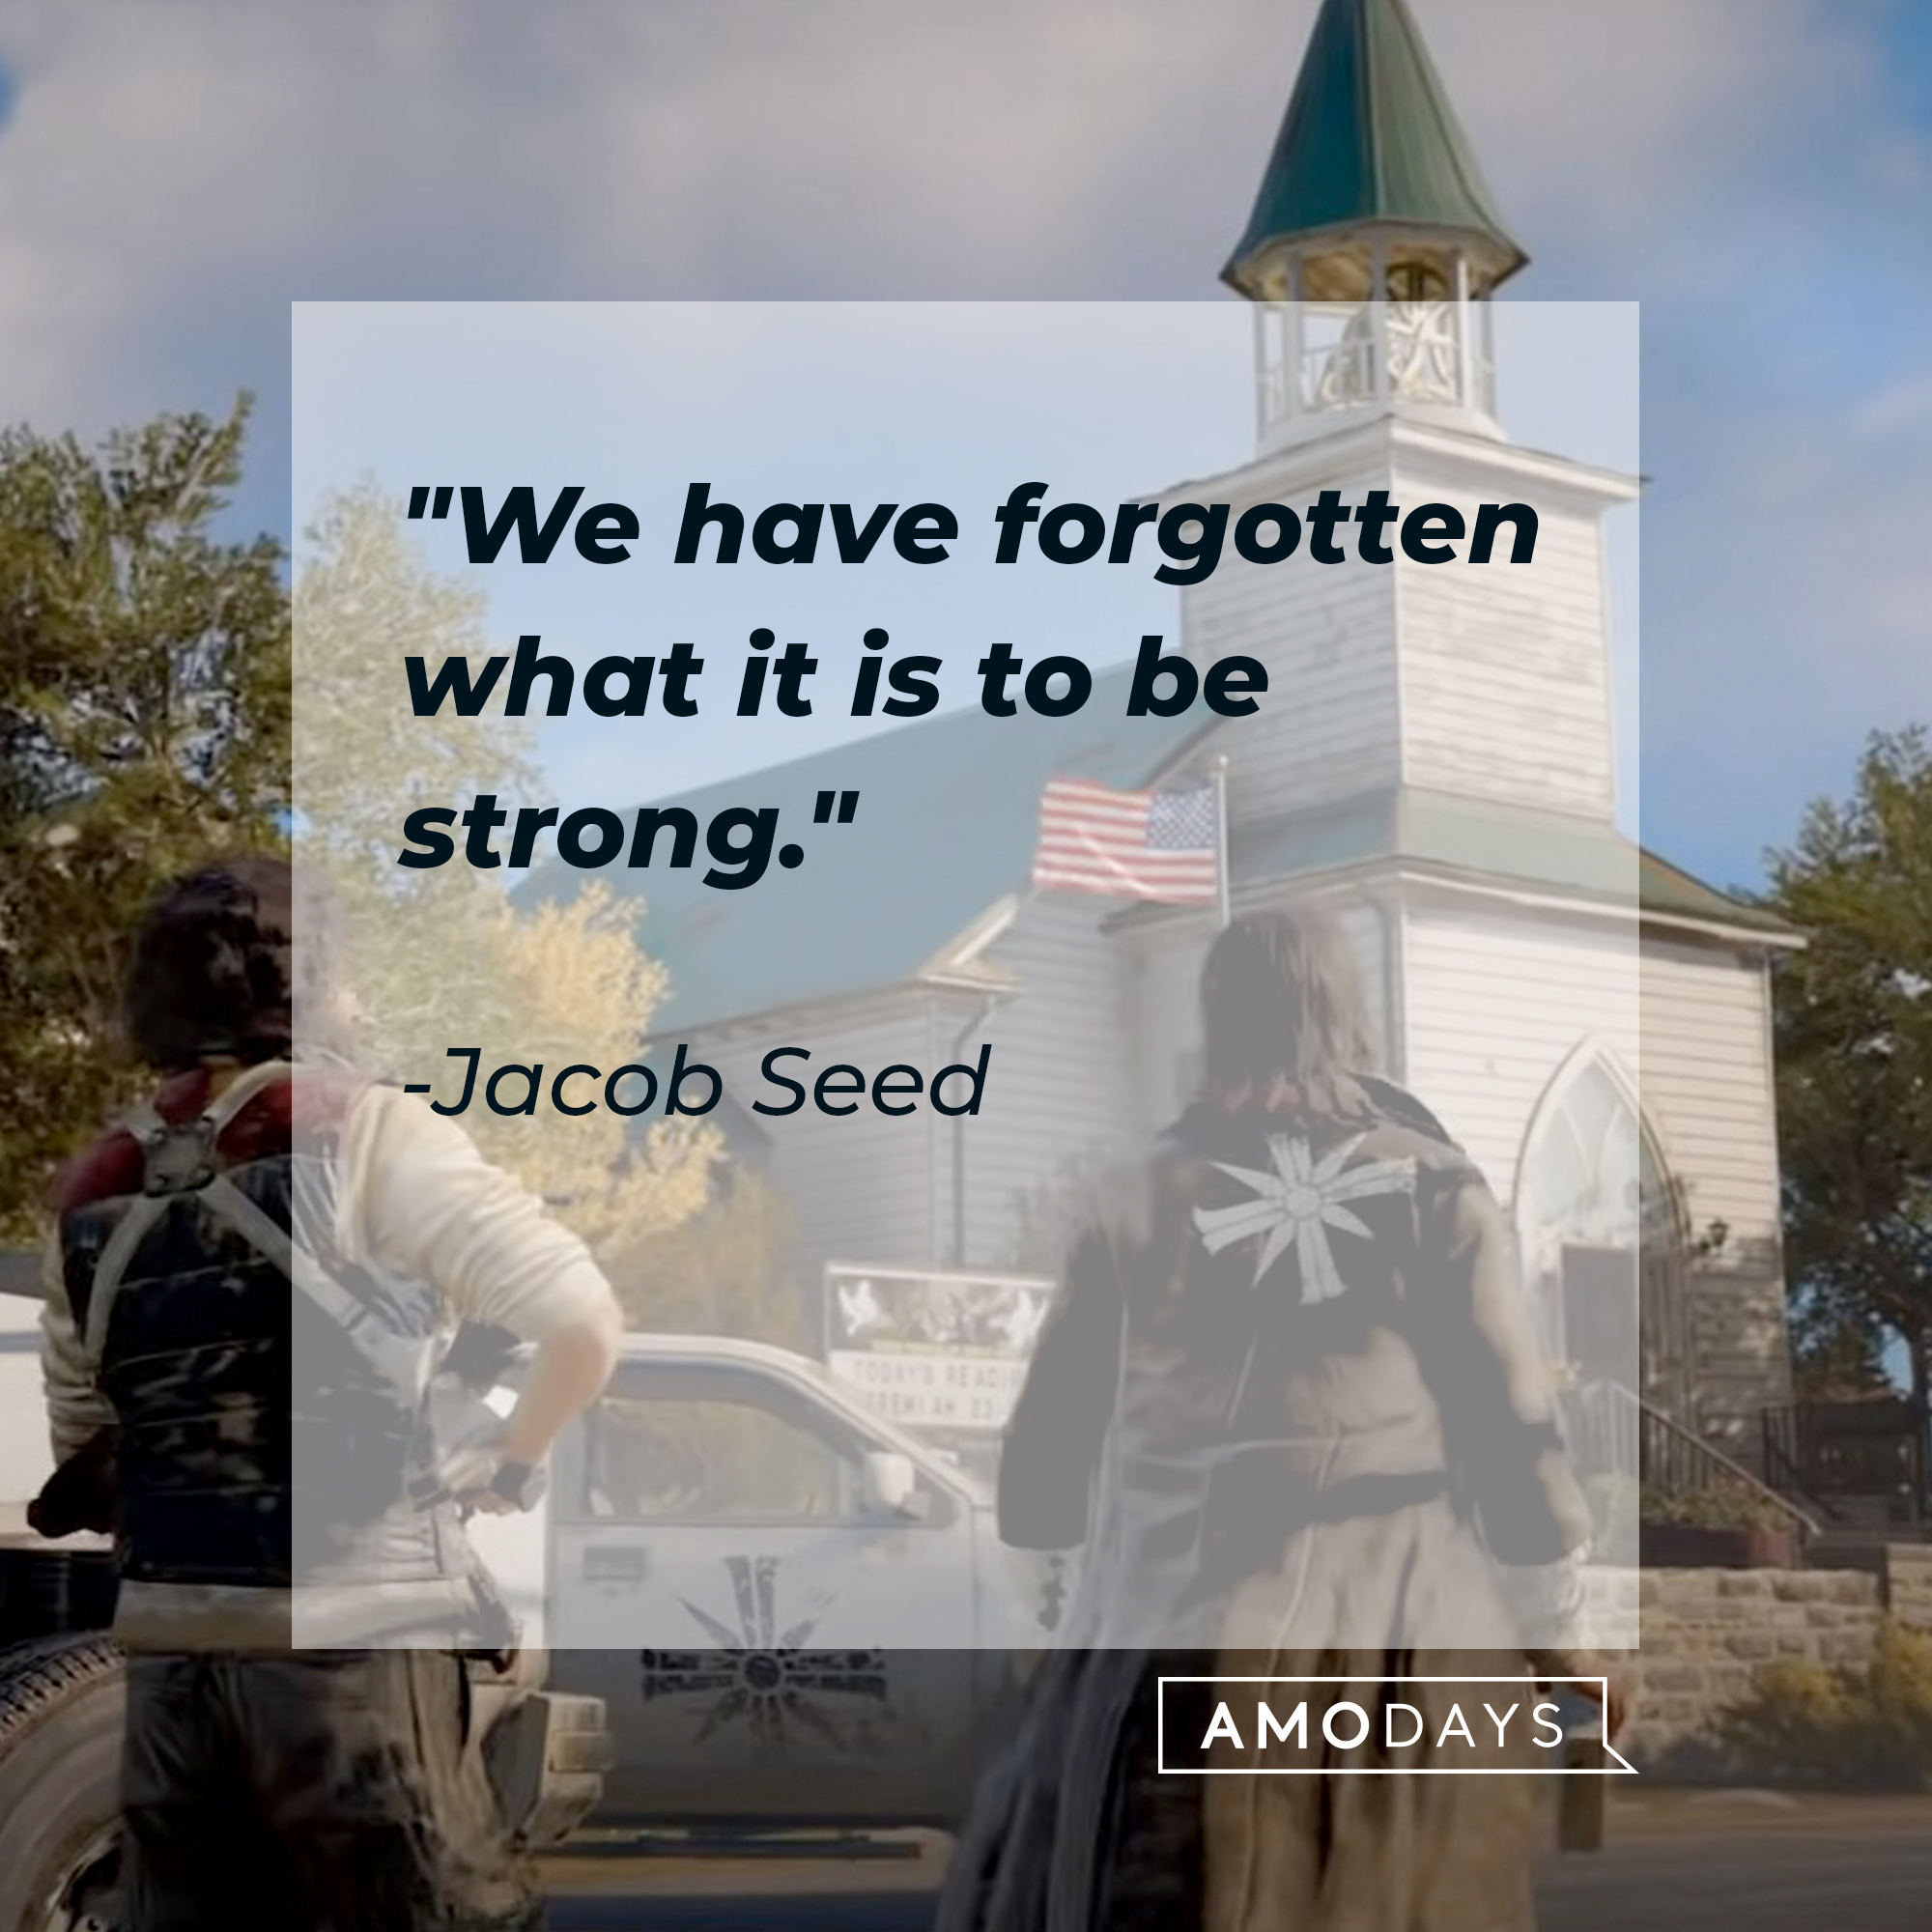 An image of "Far Cry 5" with Jacob Seed's quote: "We have forgotten what it is to be strong." | Source: youtube.com/Ubisoft North America